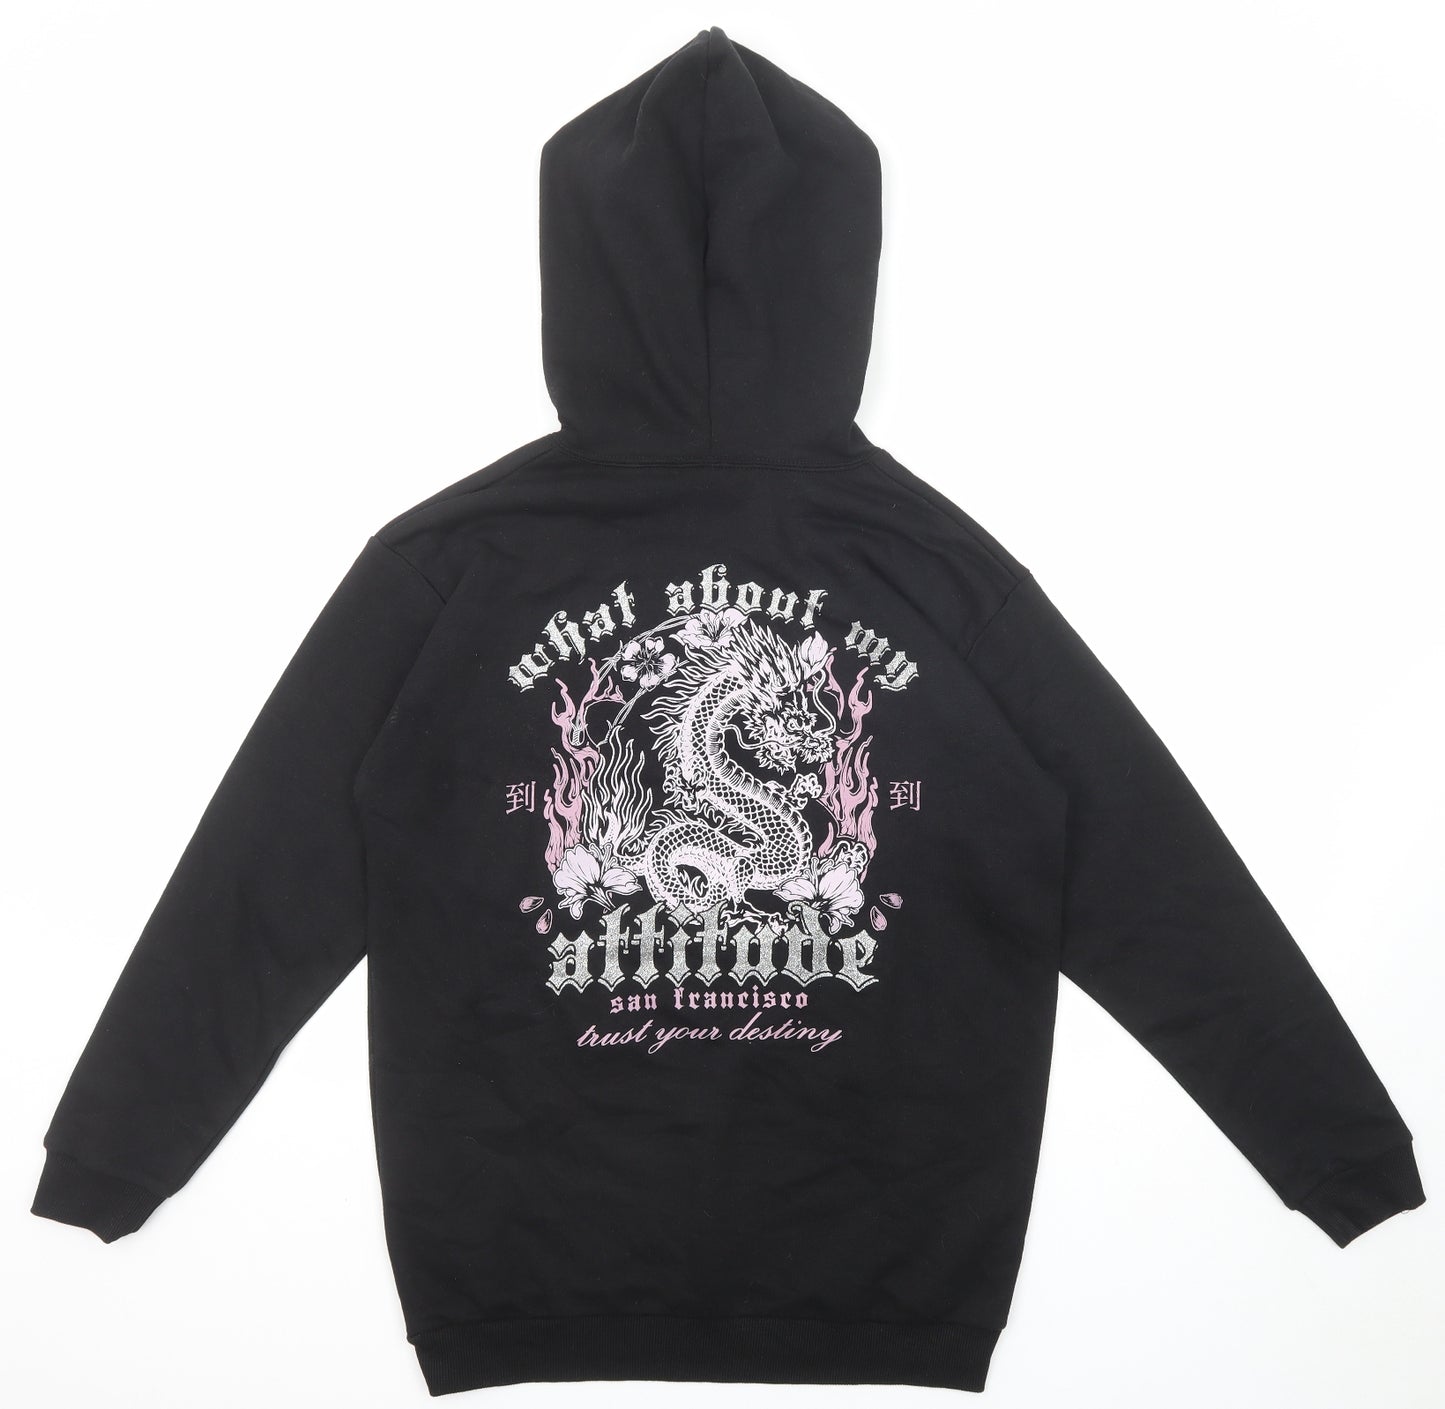 New Look Girls Black Cotton Pullover Hoodie Size 12-13 Years Pullover - Dragon